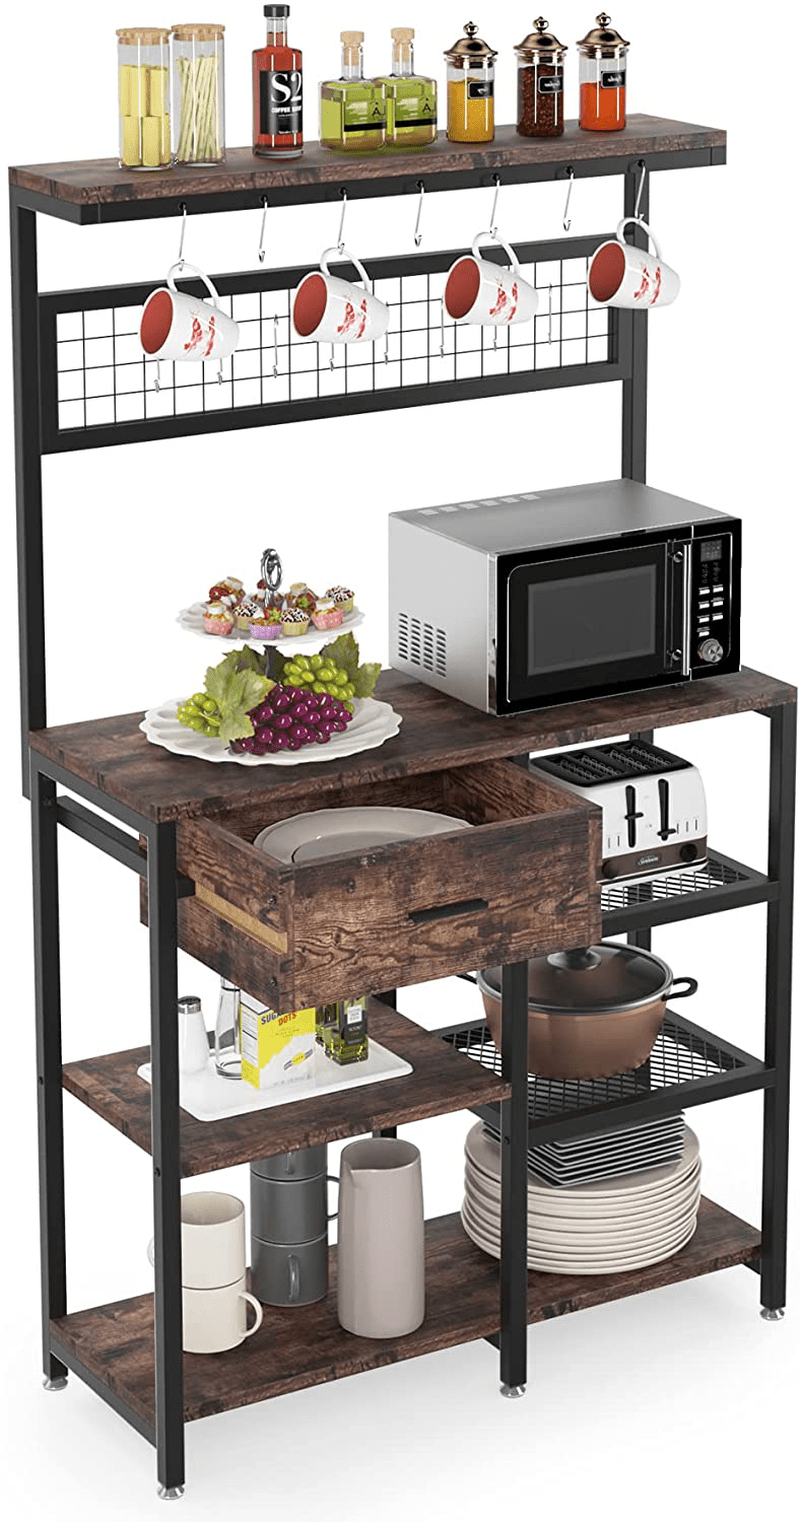 Tribesigns Baker’S Rack,Microwave Oven Stand with Storage Drawer,Floor Standing Kitchen Shelf,5-Tier Utility Storage Shelf with 15 S-Shaped Hooks,Mesh Shelves,Organizer Workstation,Vintage Brown